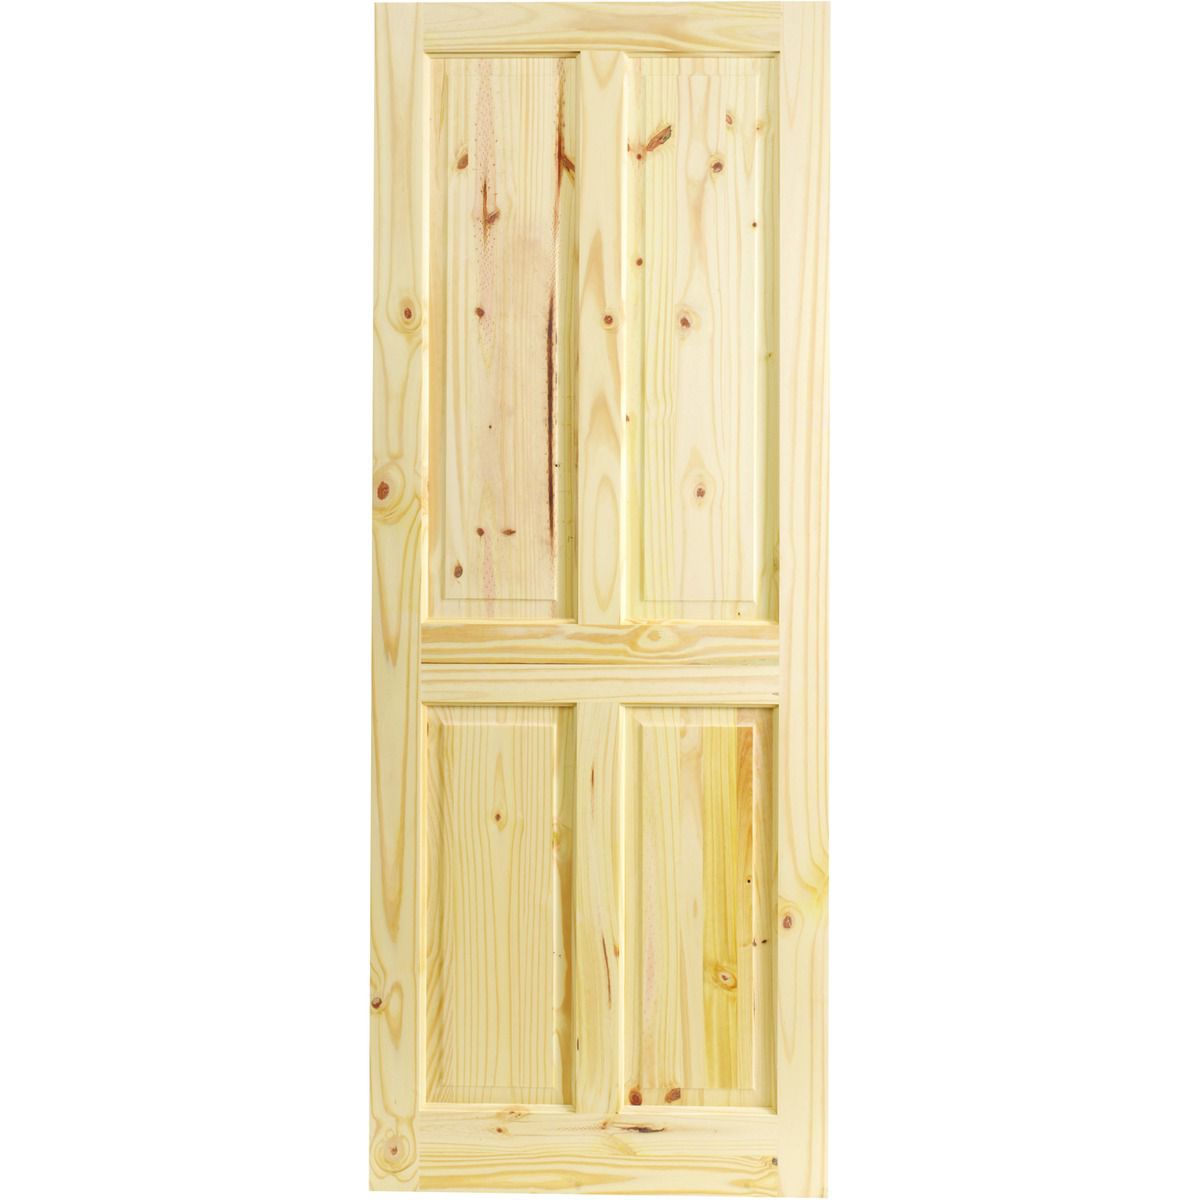 Image of Wickes Chester Knotty Pine 4 Panel Internal Door - 1981 x 762mm